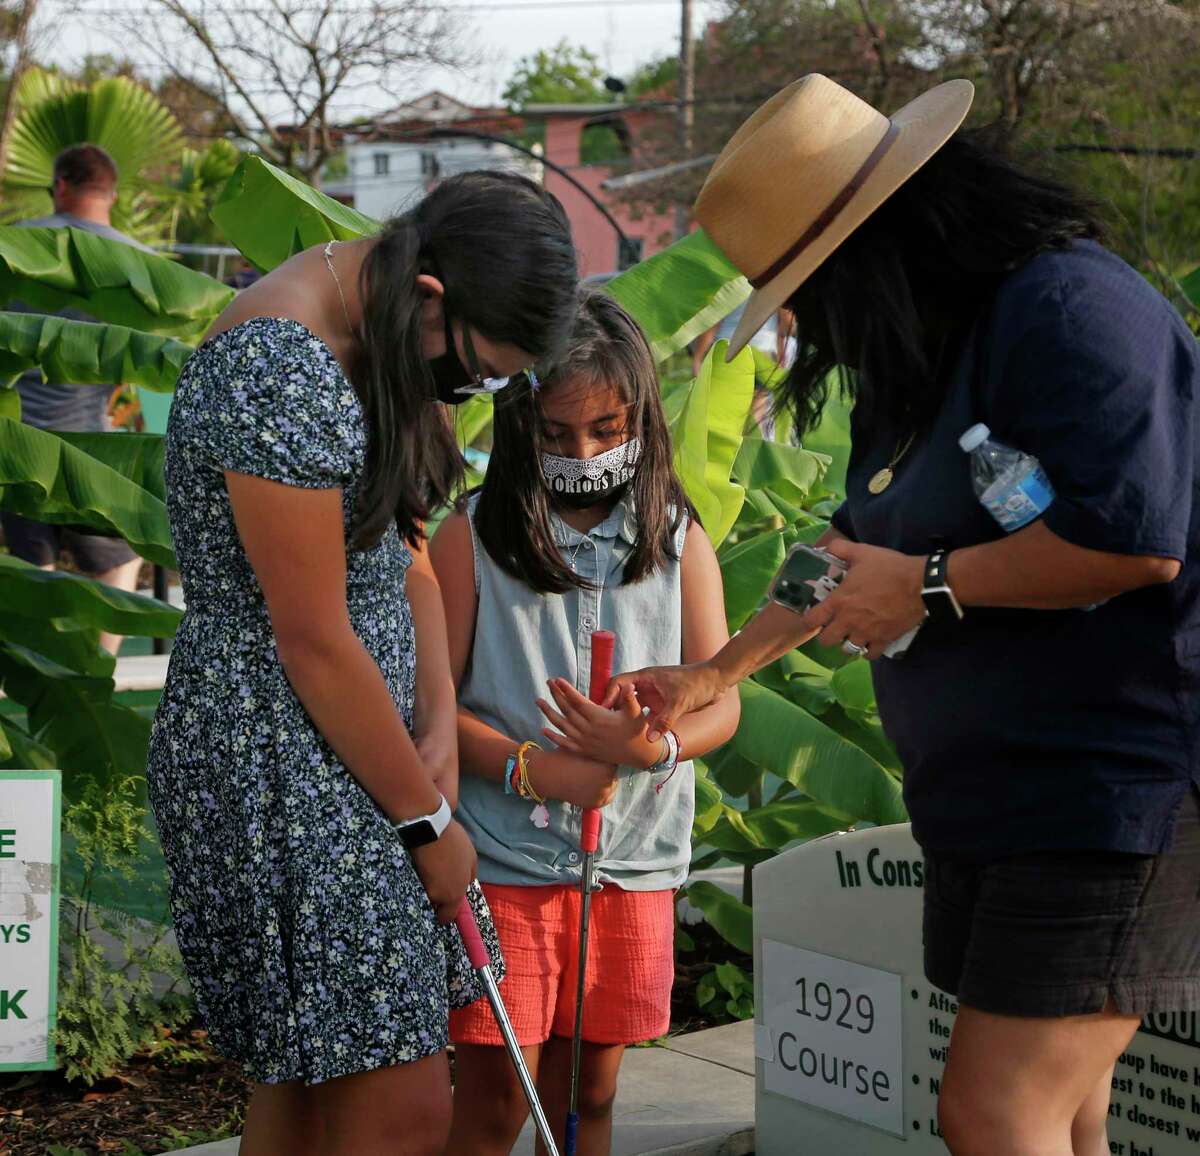 Martha Martinez-Flores helps her daughters 14-year-old Mara Flores and 8-year-old Mia Flores figure out the proper way to hold a putter during a recent visit to Cool Crest Miniature Golf.